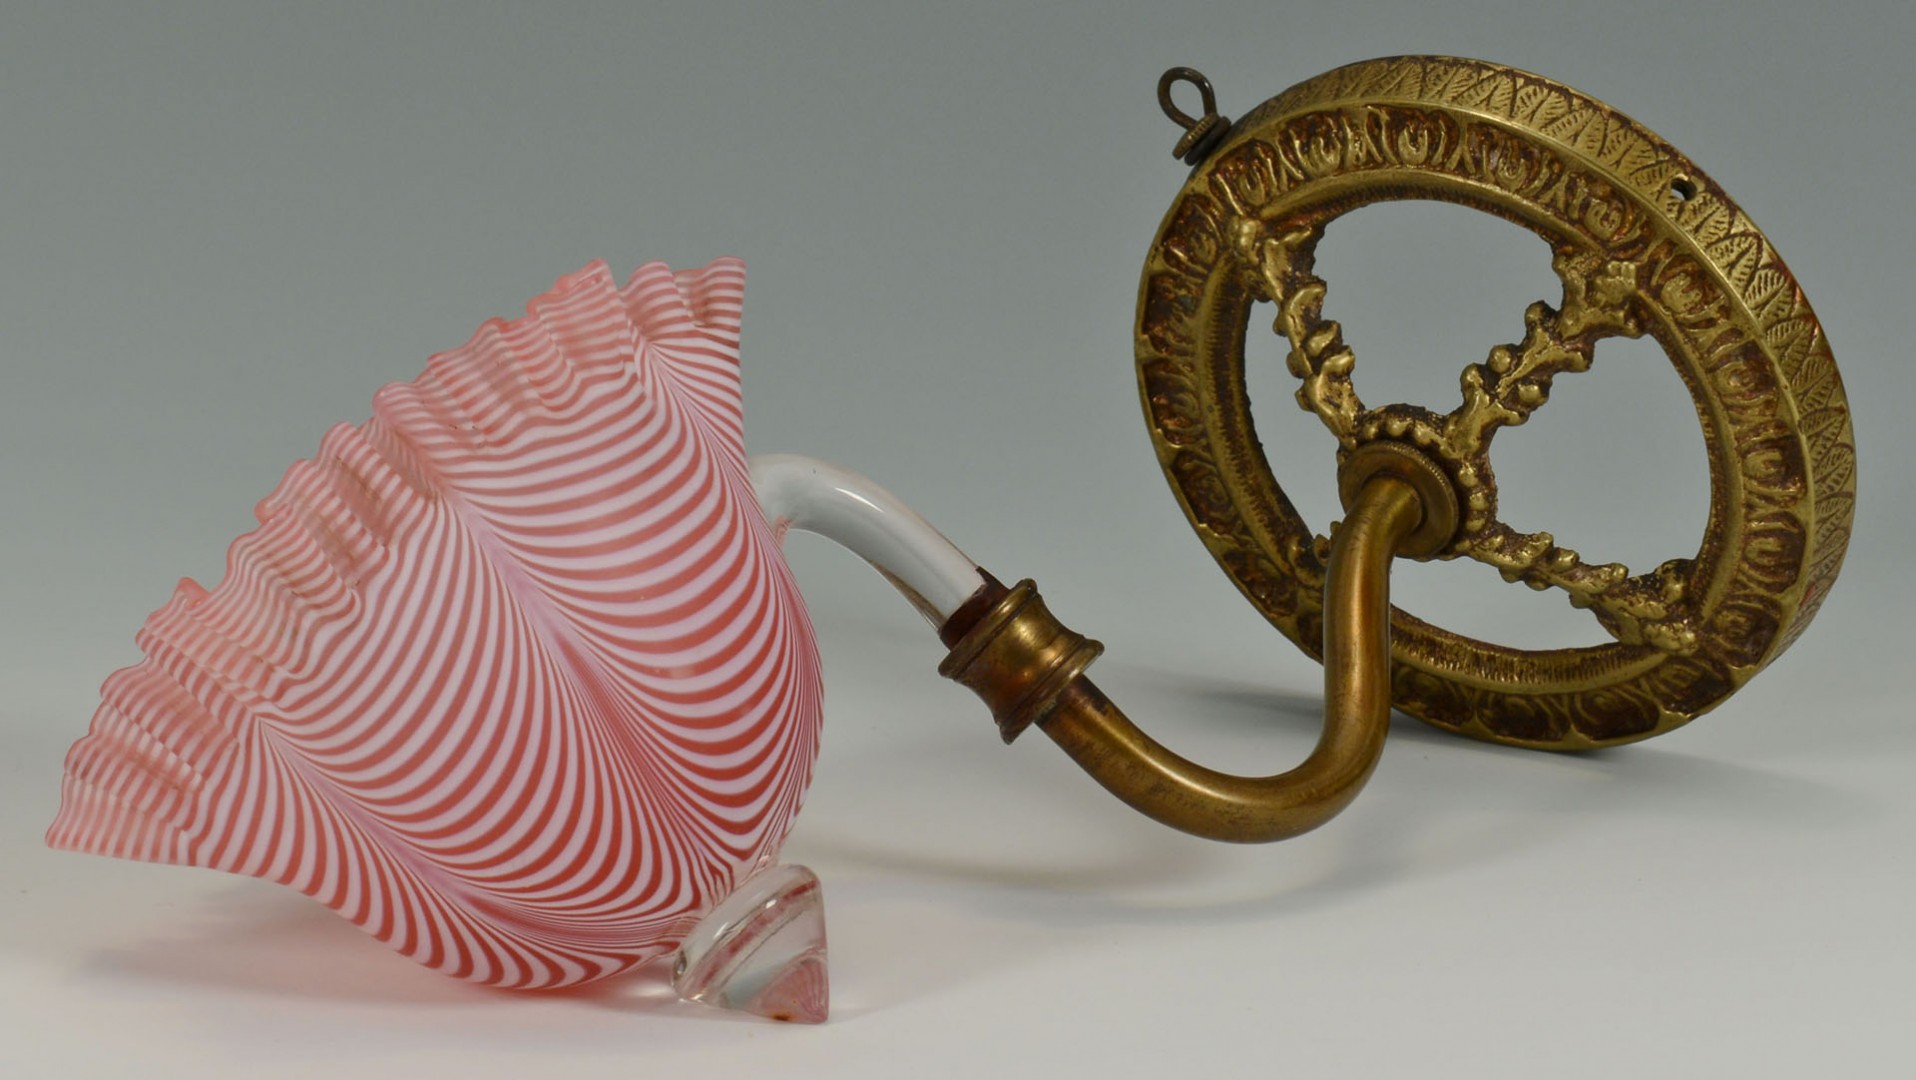 Lot 169: Art Glass Red & White Swirl Wall Sconce